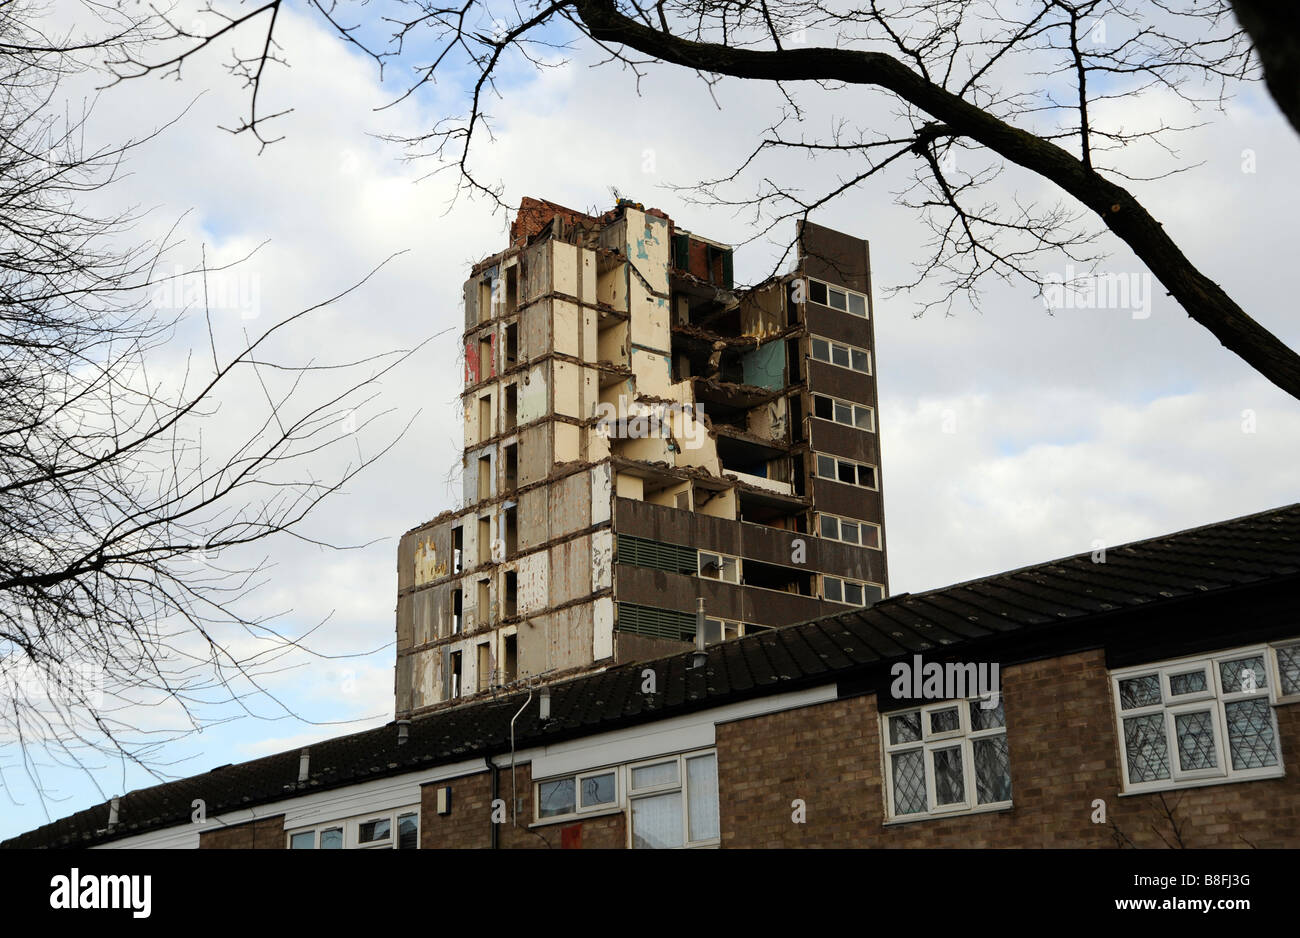 Demolition of 1960's high rise tower of flats in the inner city area of Highgate, Birmingham. Homes below not being demolished. Stock Photo